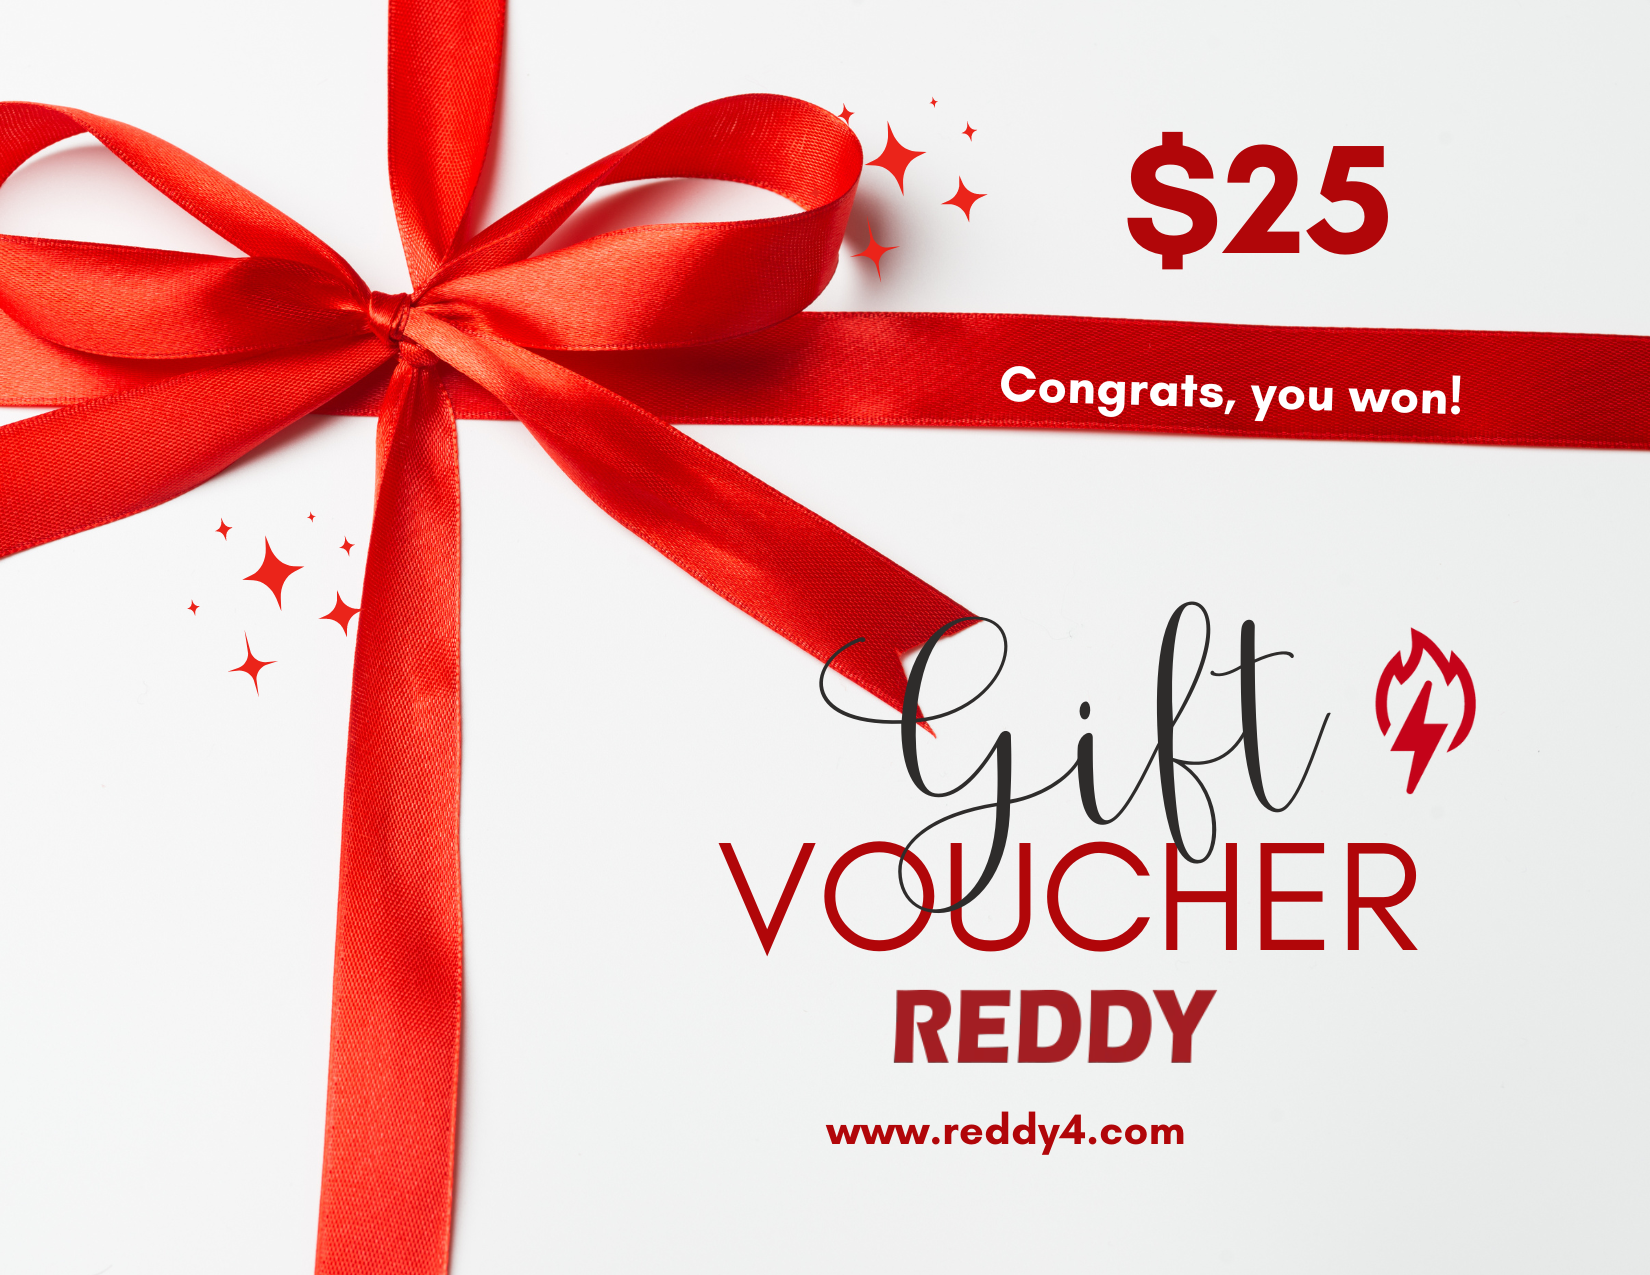 Reddy Health Cards – The Gift of Wellness and Vitality